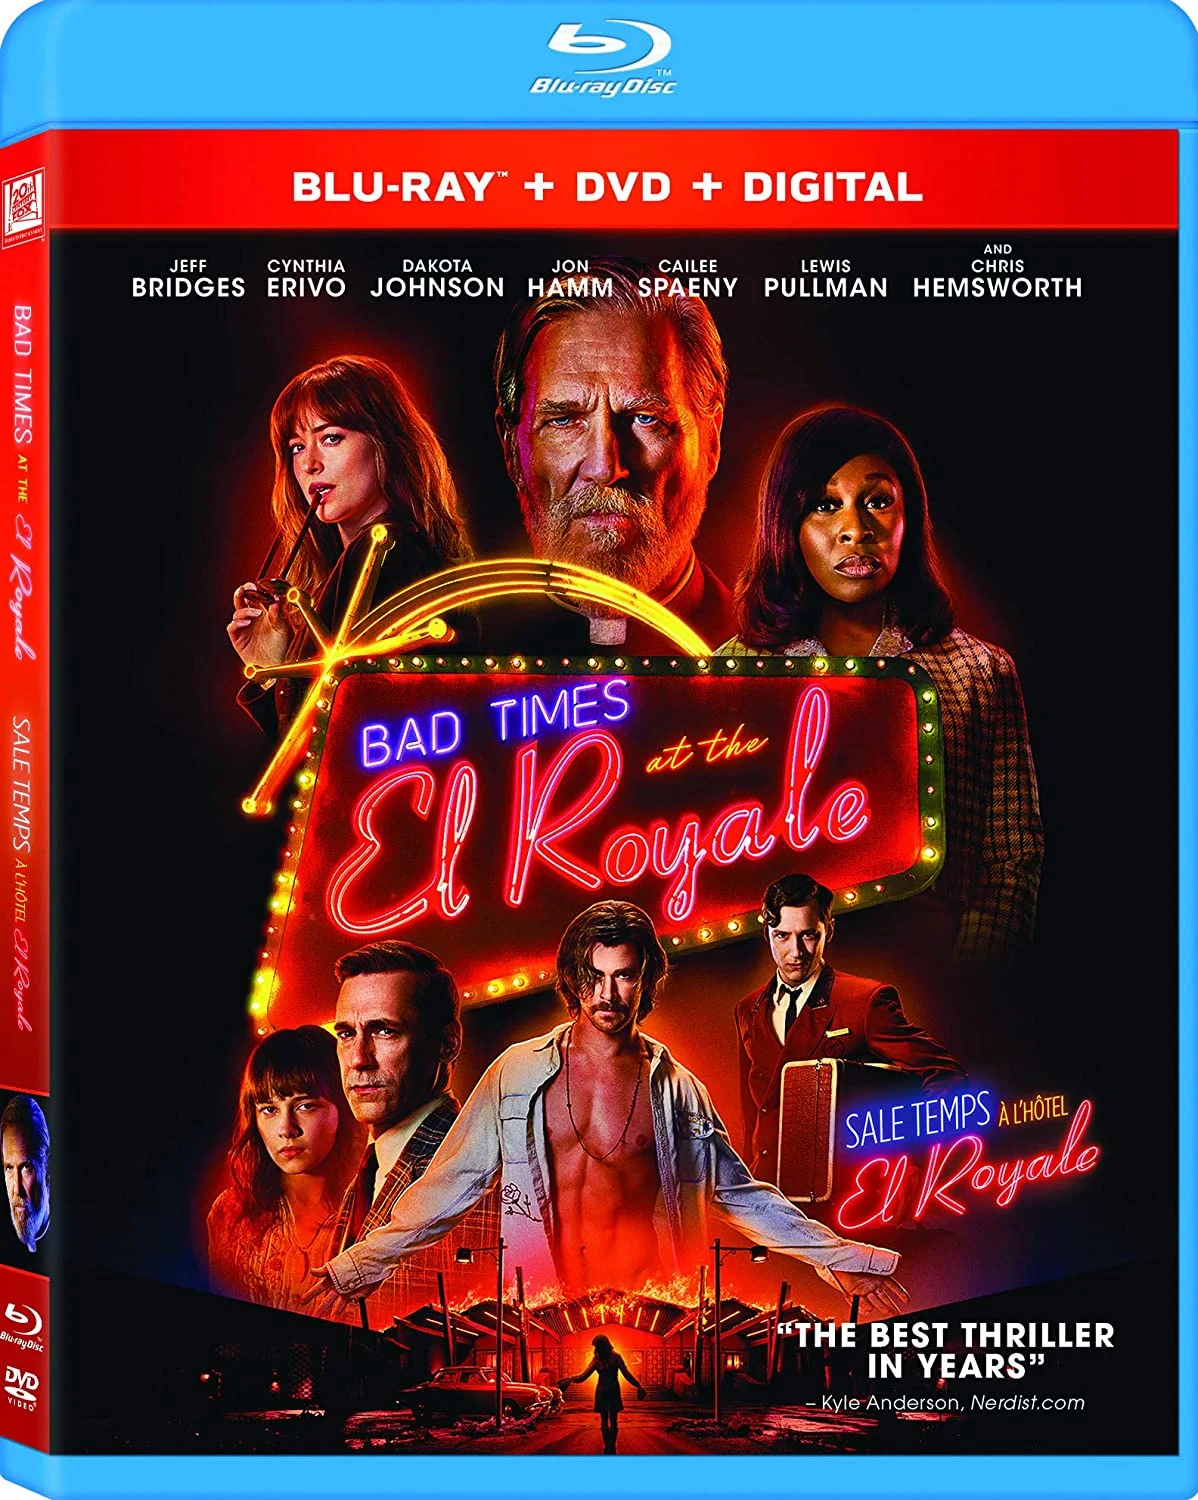 Bad Times at the El Royale (Blu-ray/DVD Combo) on MovieShack